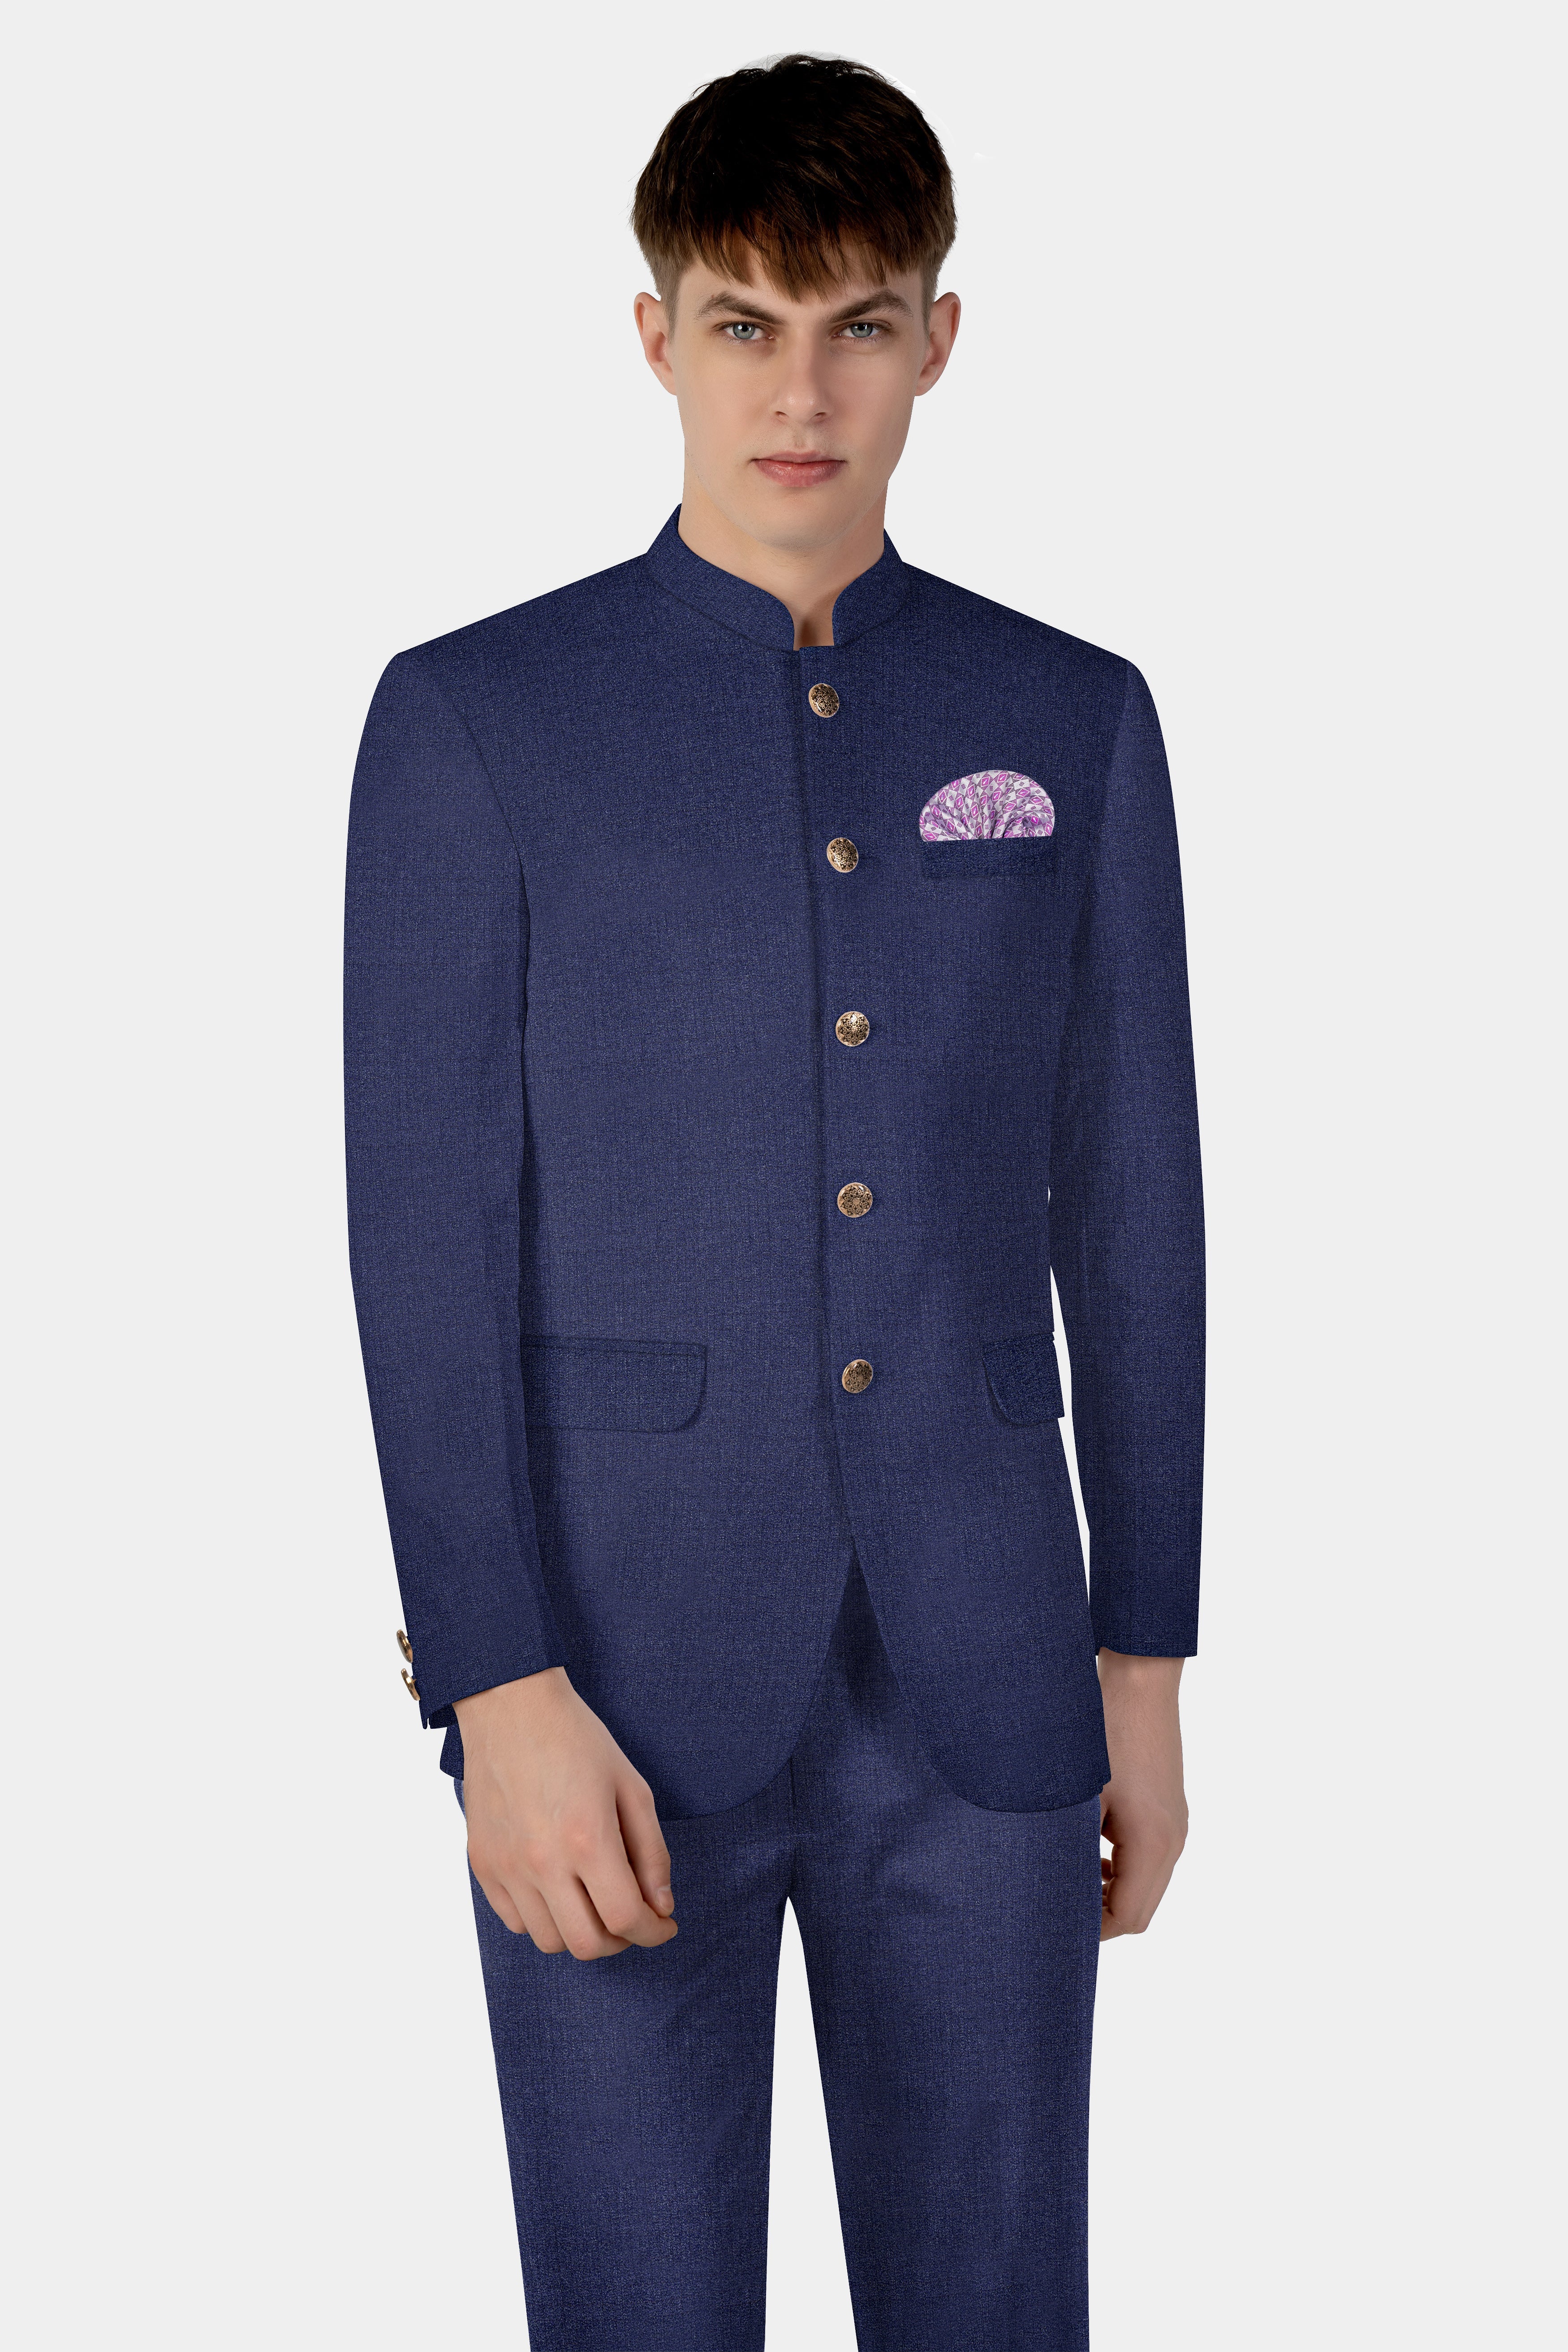 Ebony Clay Blue Textured Wool Blend Bandhgala Suit